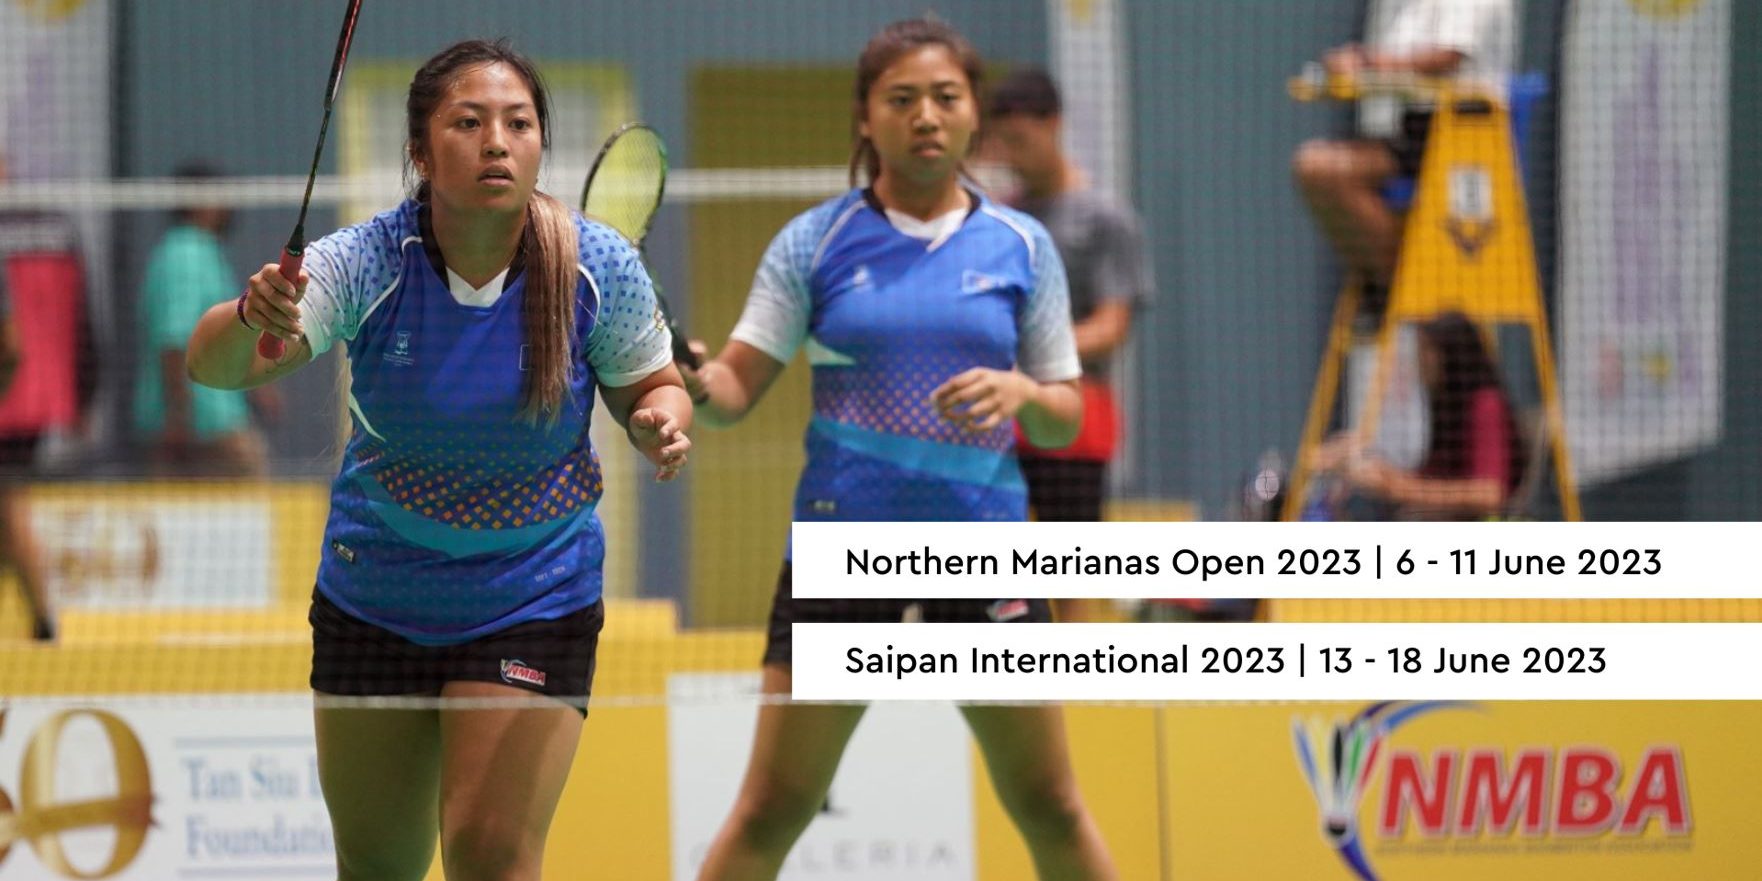 Northern Marianas legacy transpires with first BWF international tournaments sanctioned in 2023